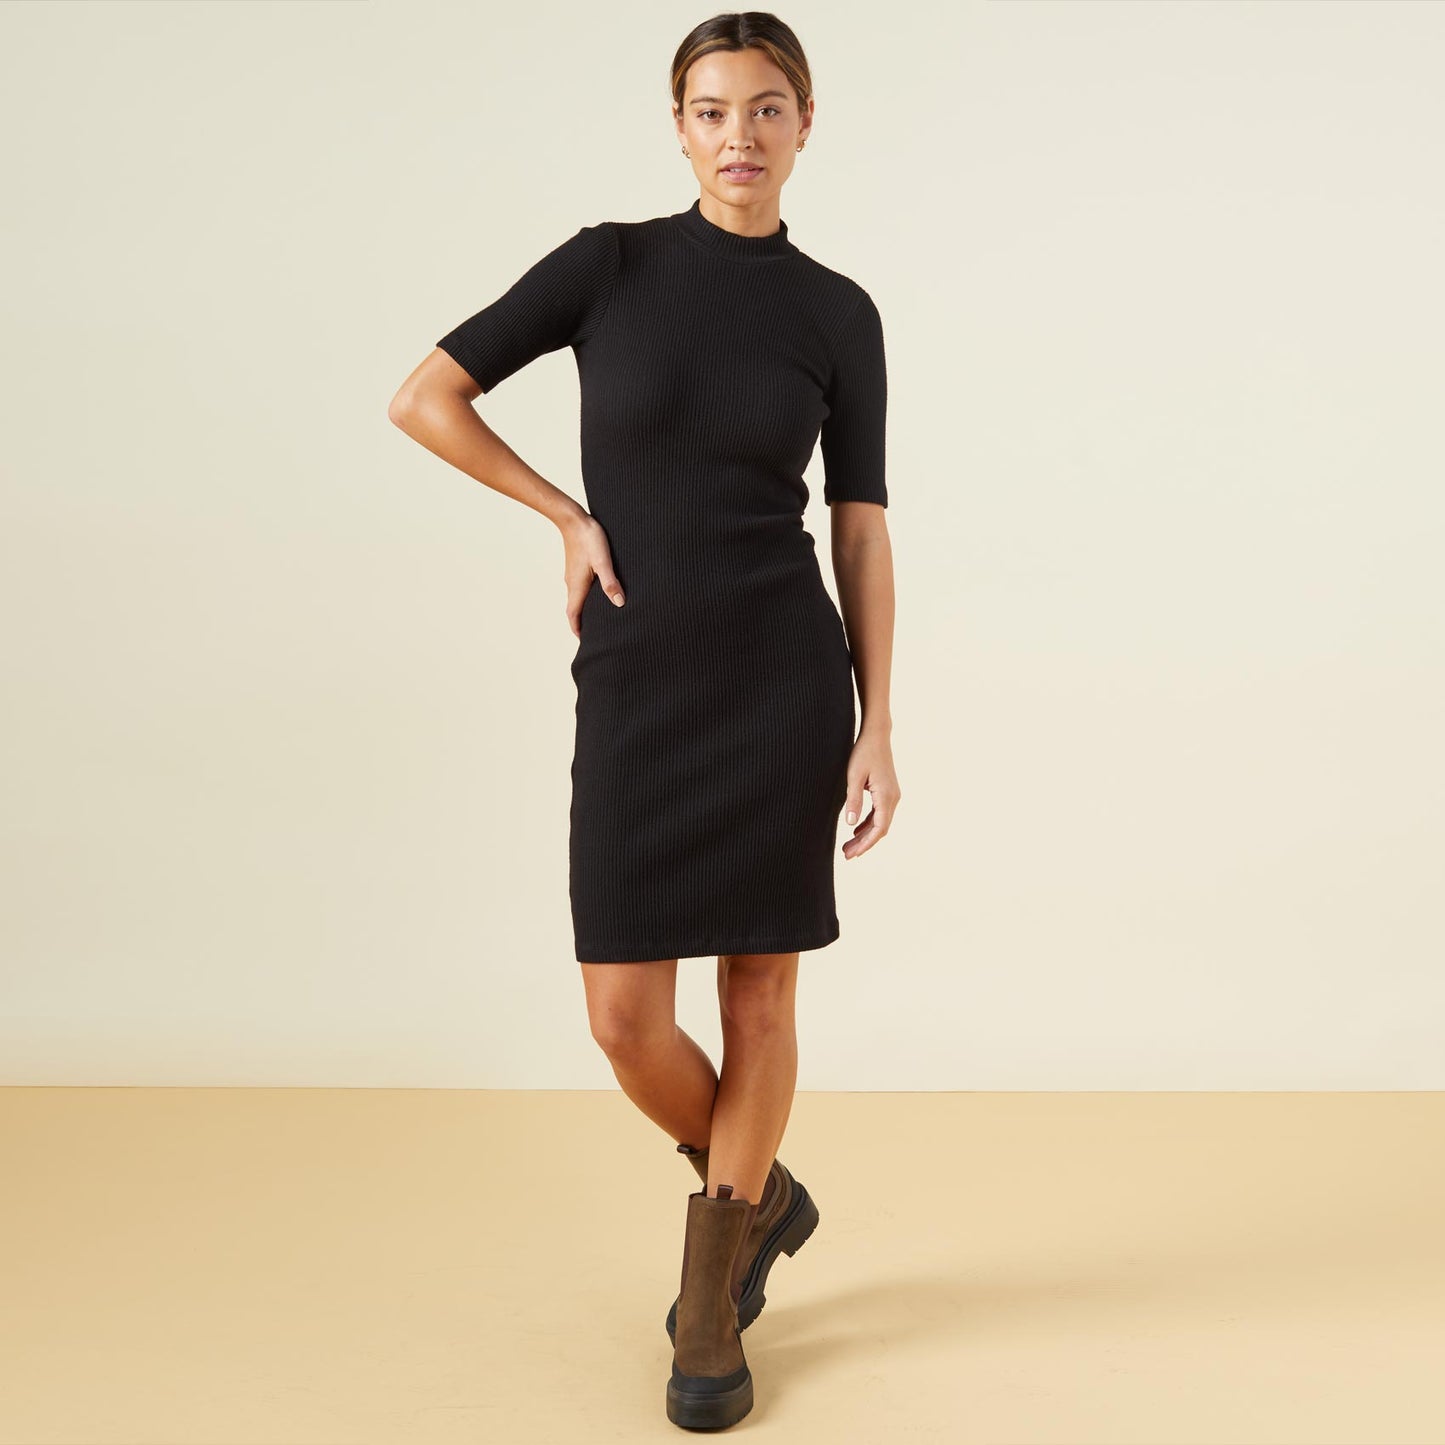 Front view of model wearing the brushed rib mock neck dress in black.